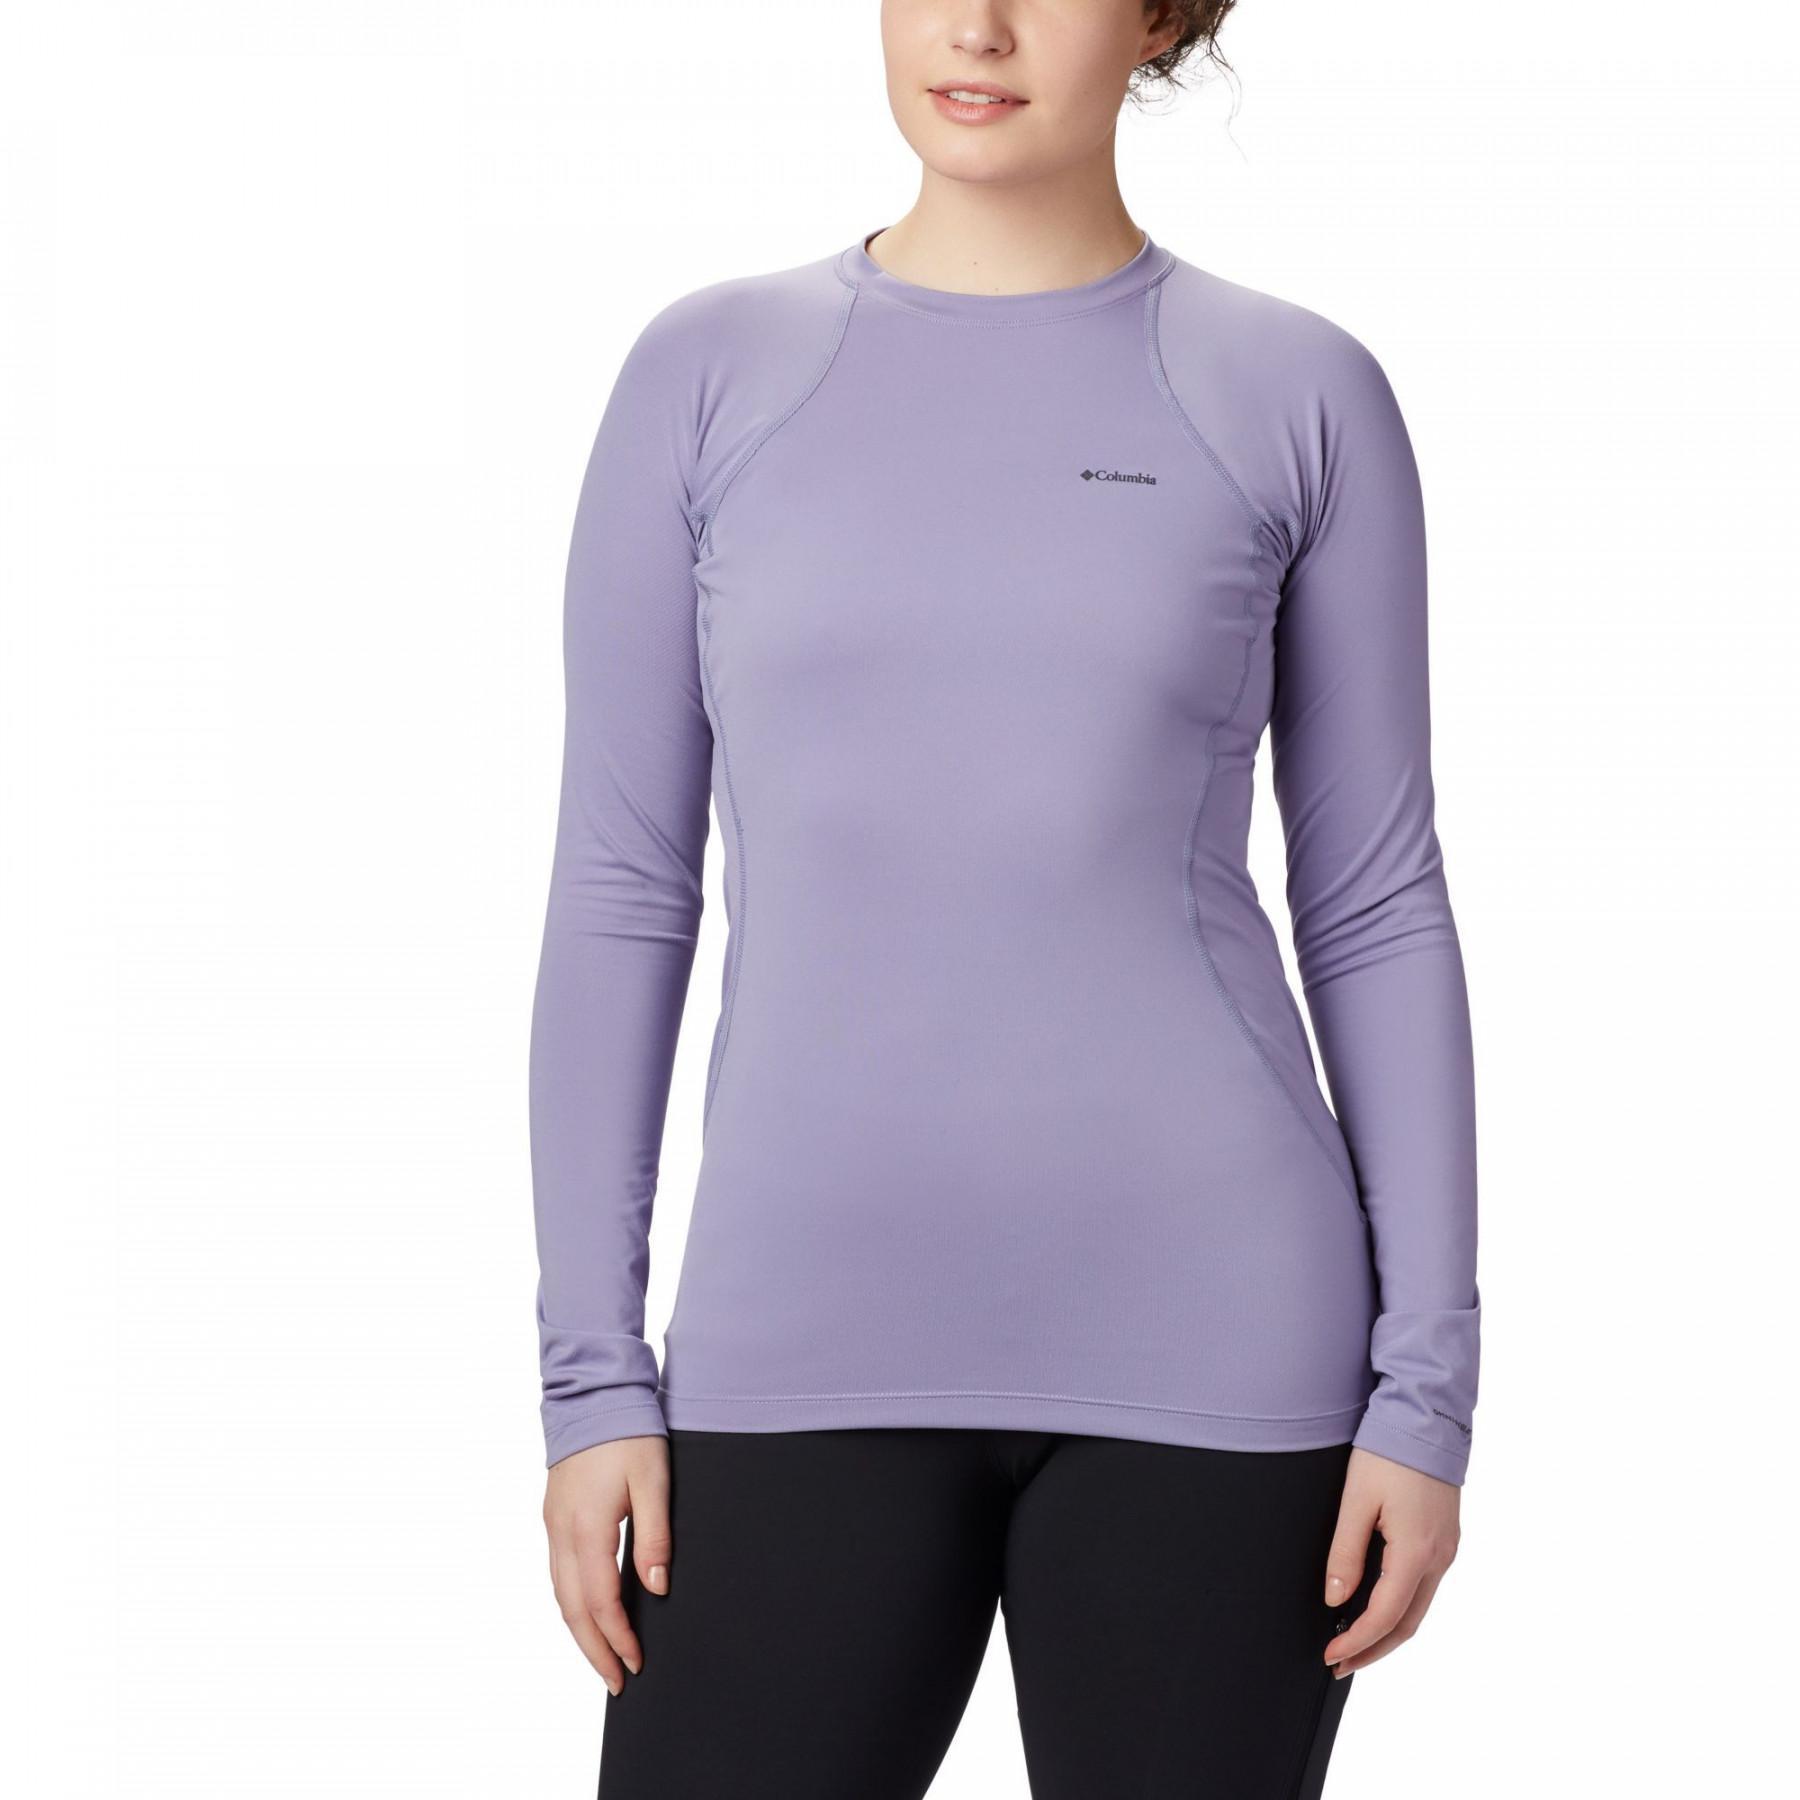 Colombia Midweight women's long sleeve jersey